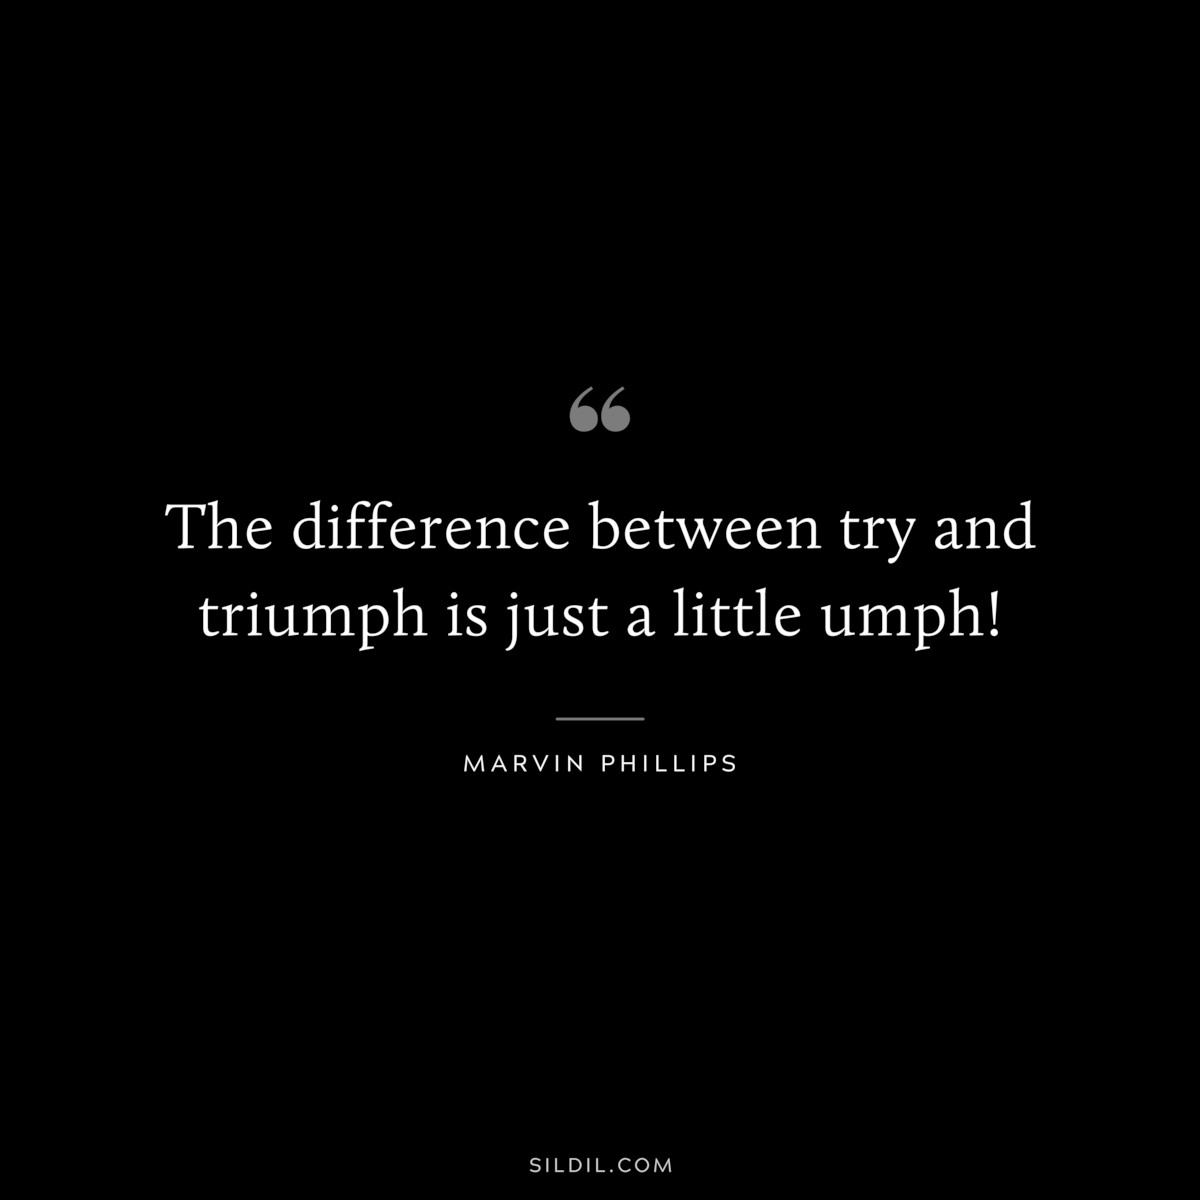 The difference between try and triumph is just a little umph! ― Marvin Phillips